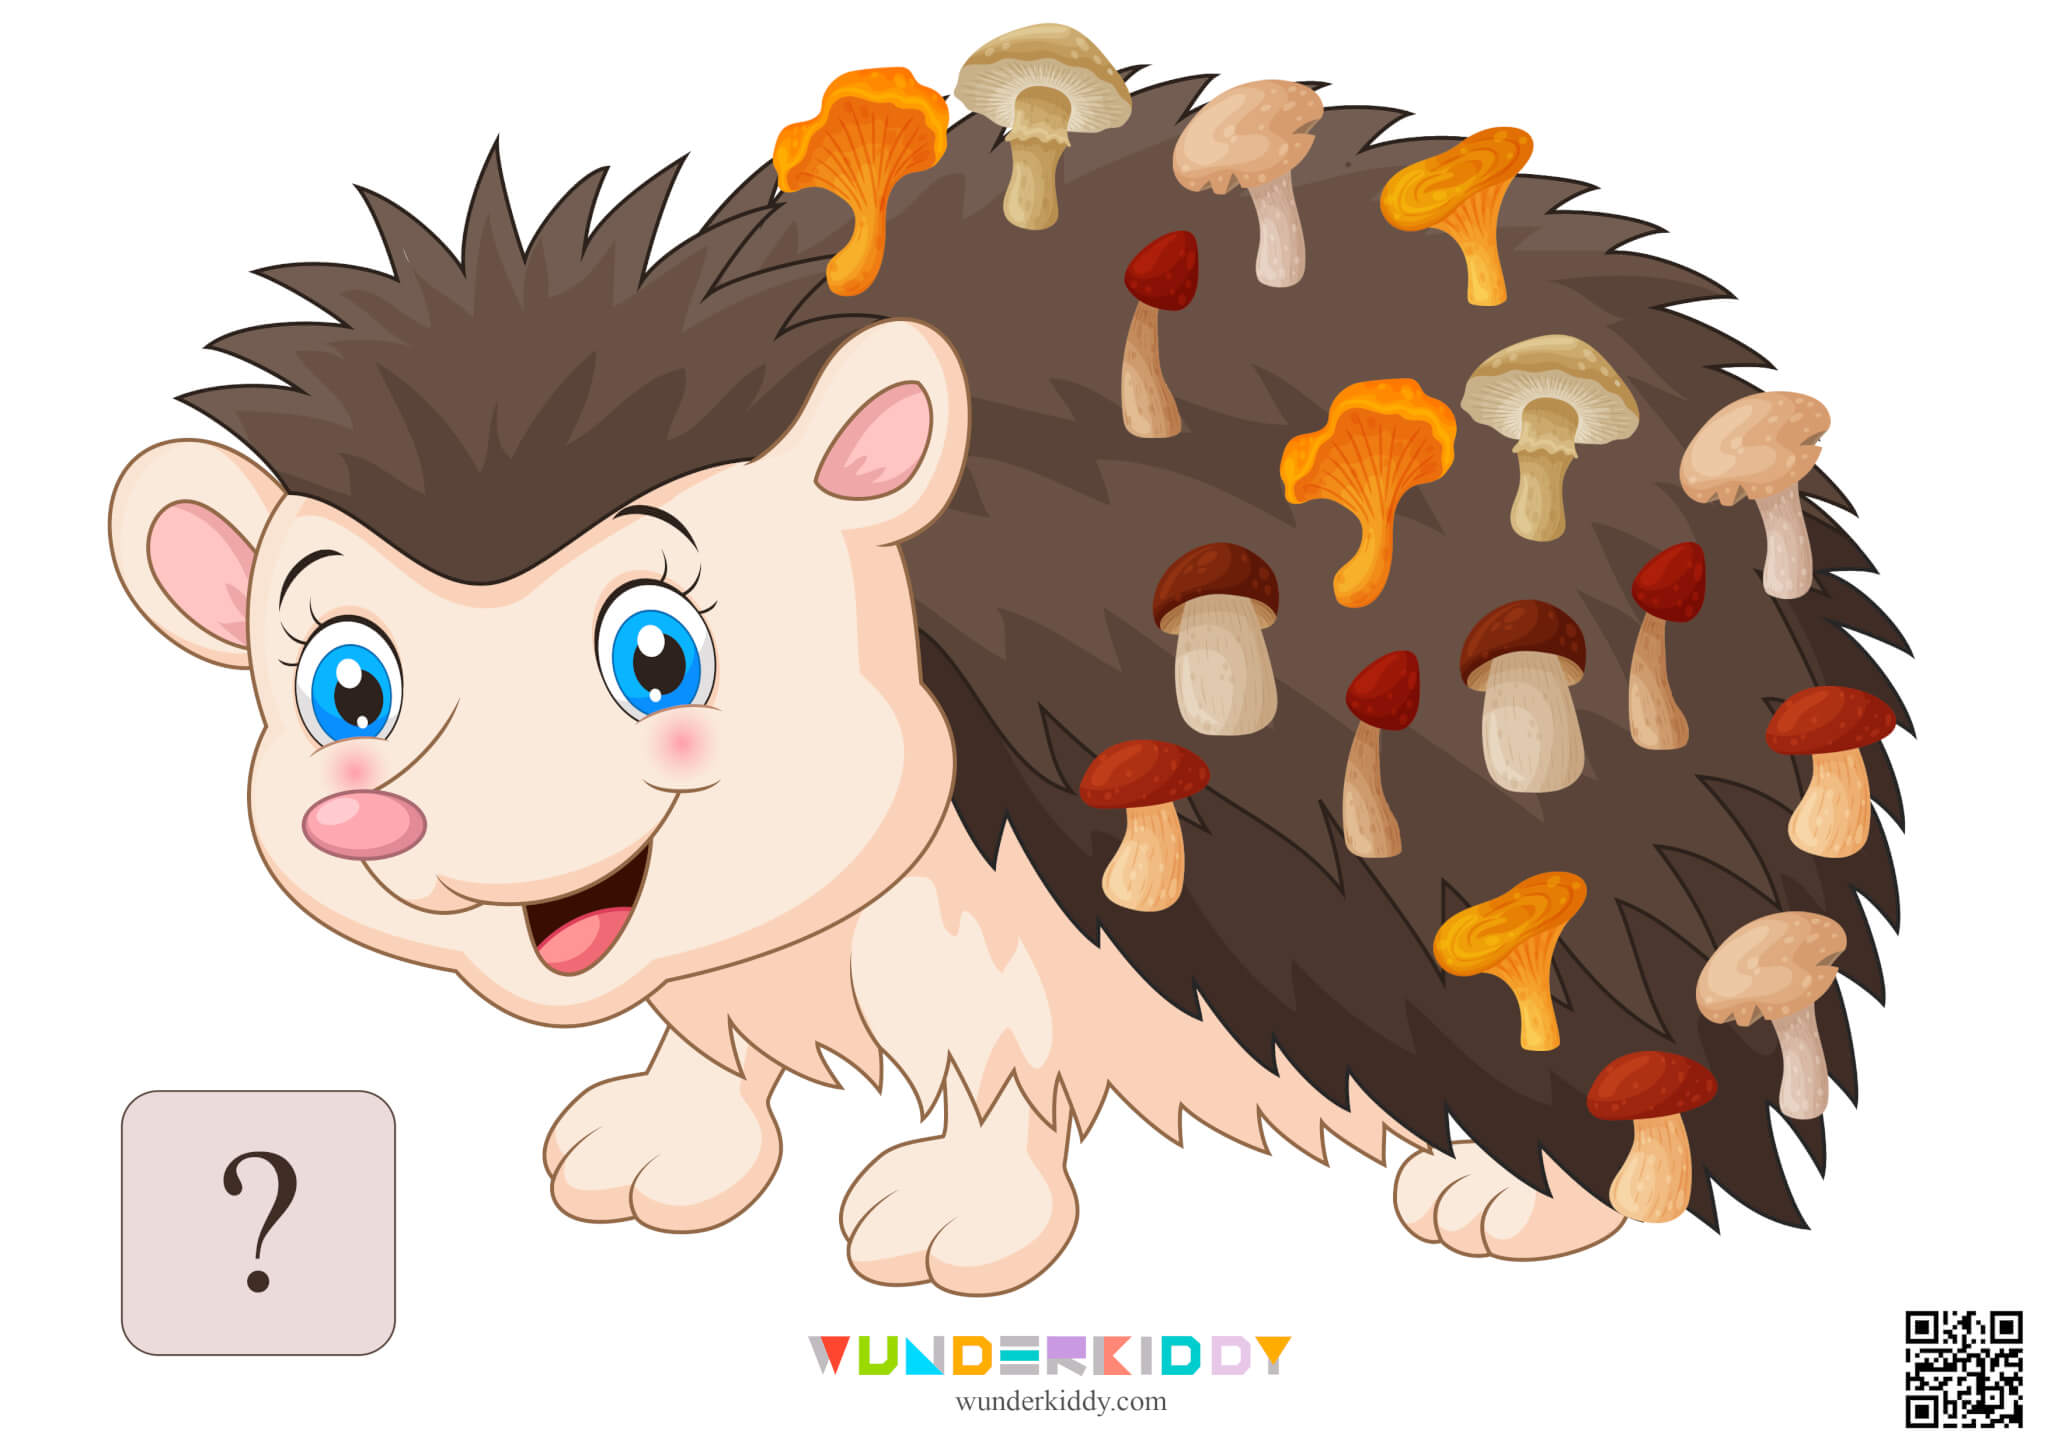 Worksheet Count to 20 with Hedgehog and Mushrooms - Image 21